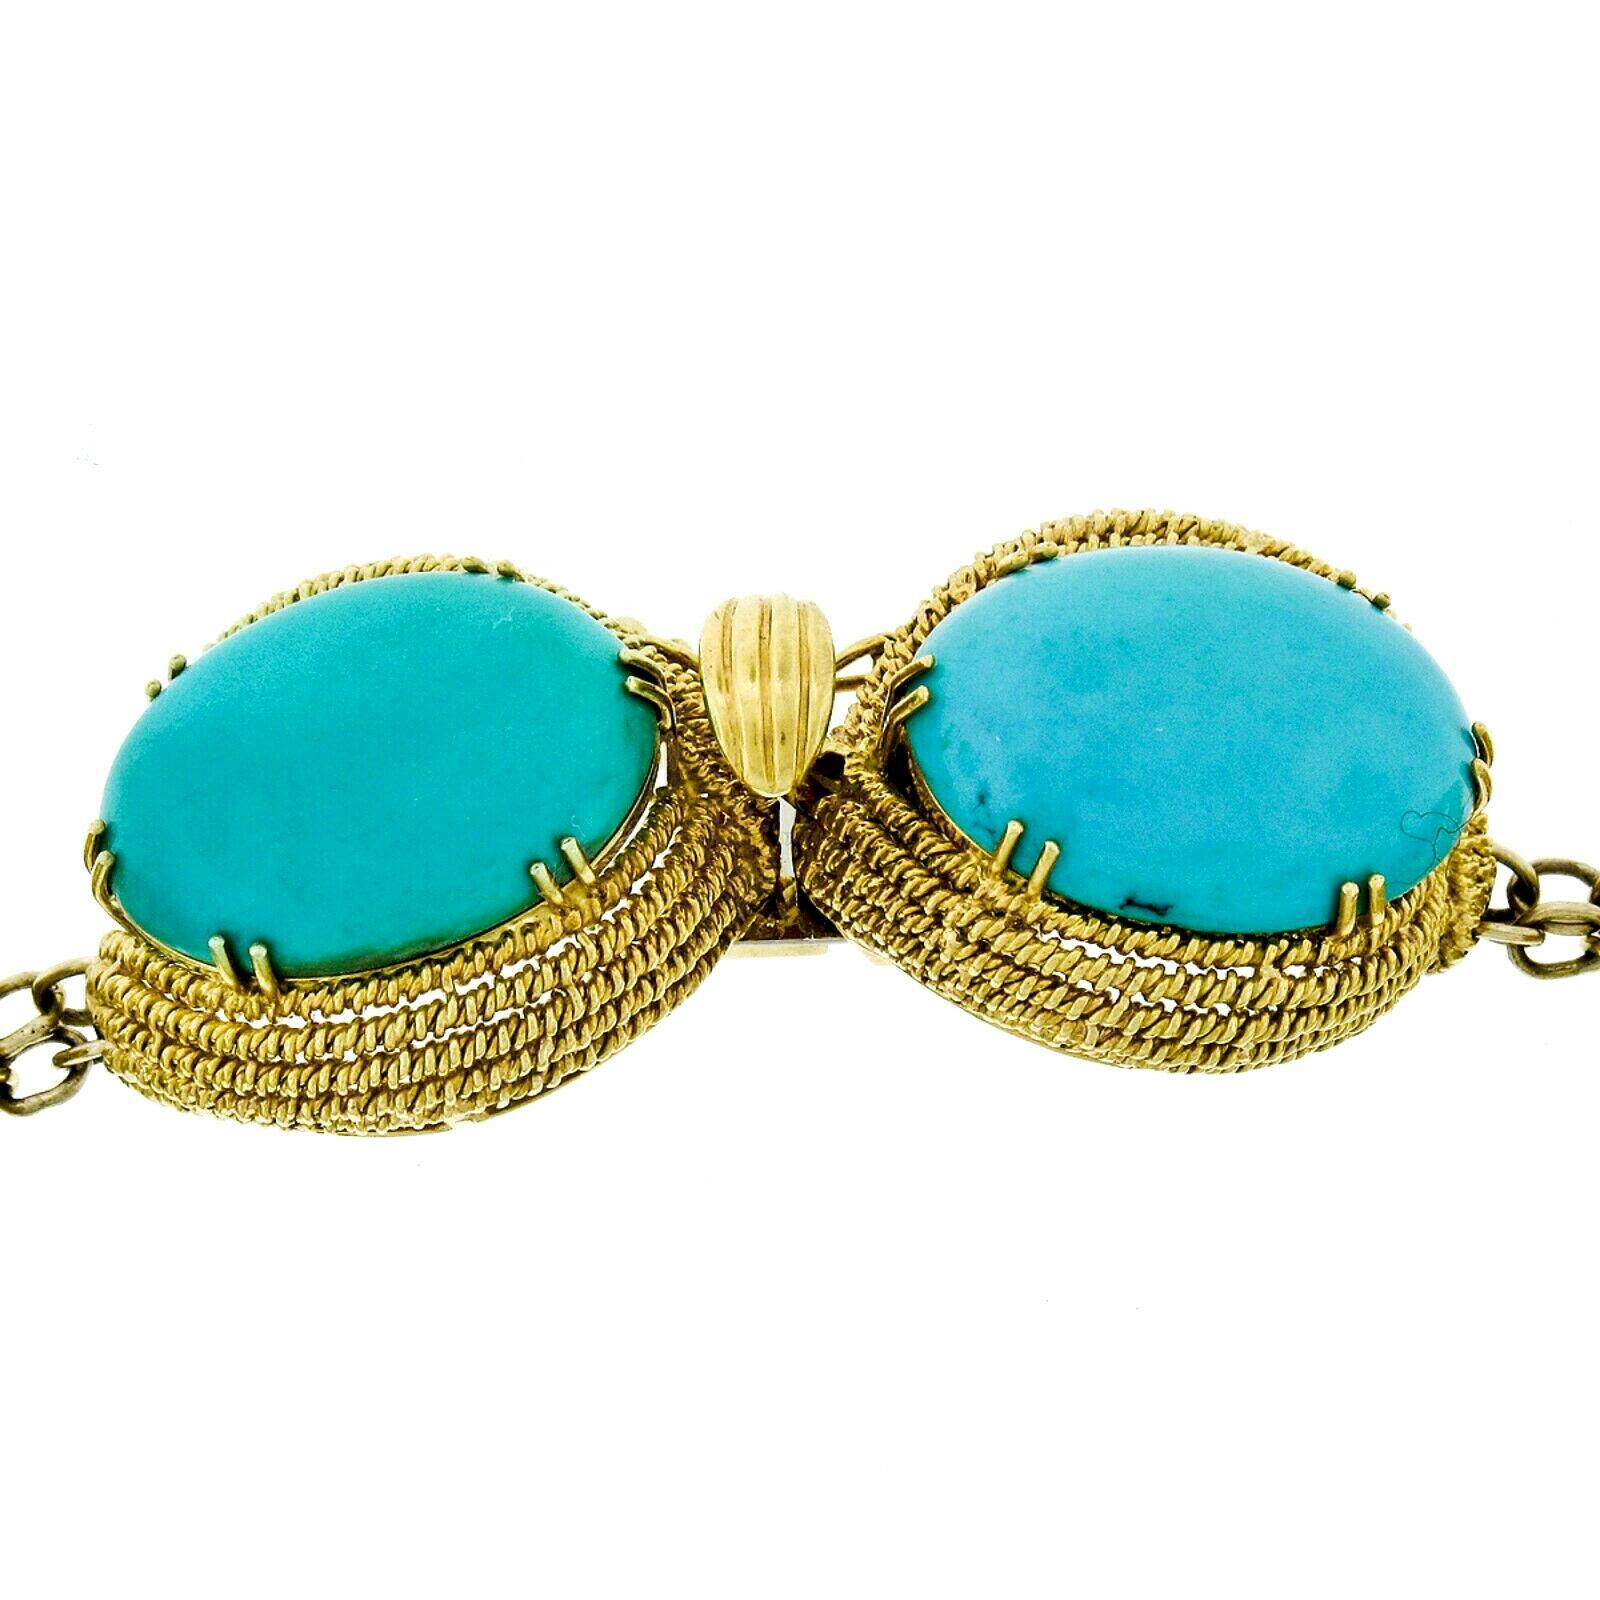 Vintage Handmade 18k Gold GIA Large 200ctw Cabochon Turquoise Statement Necklace 1